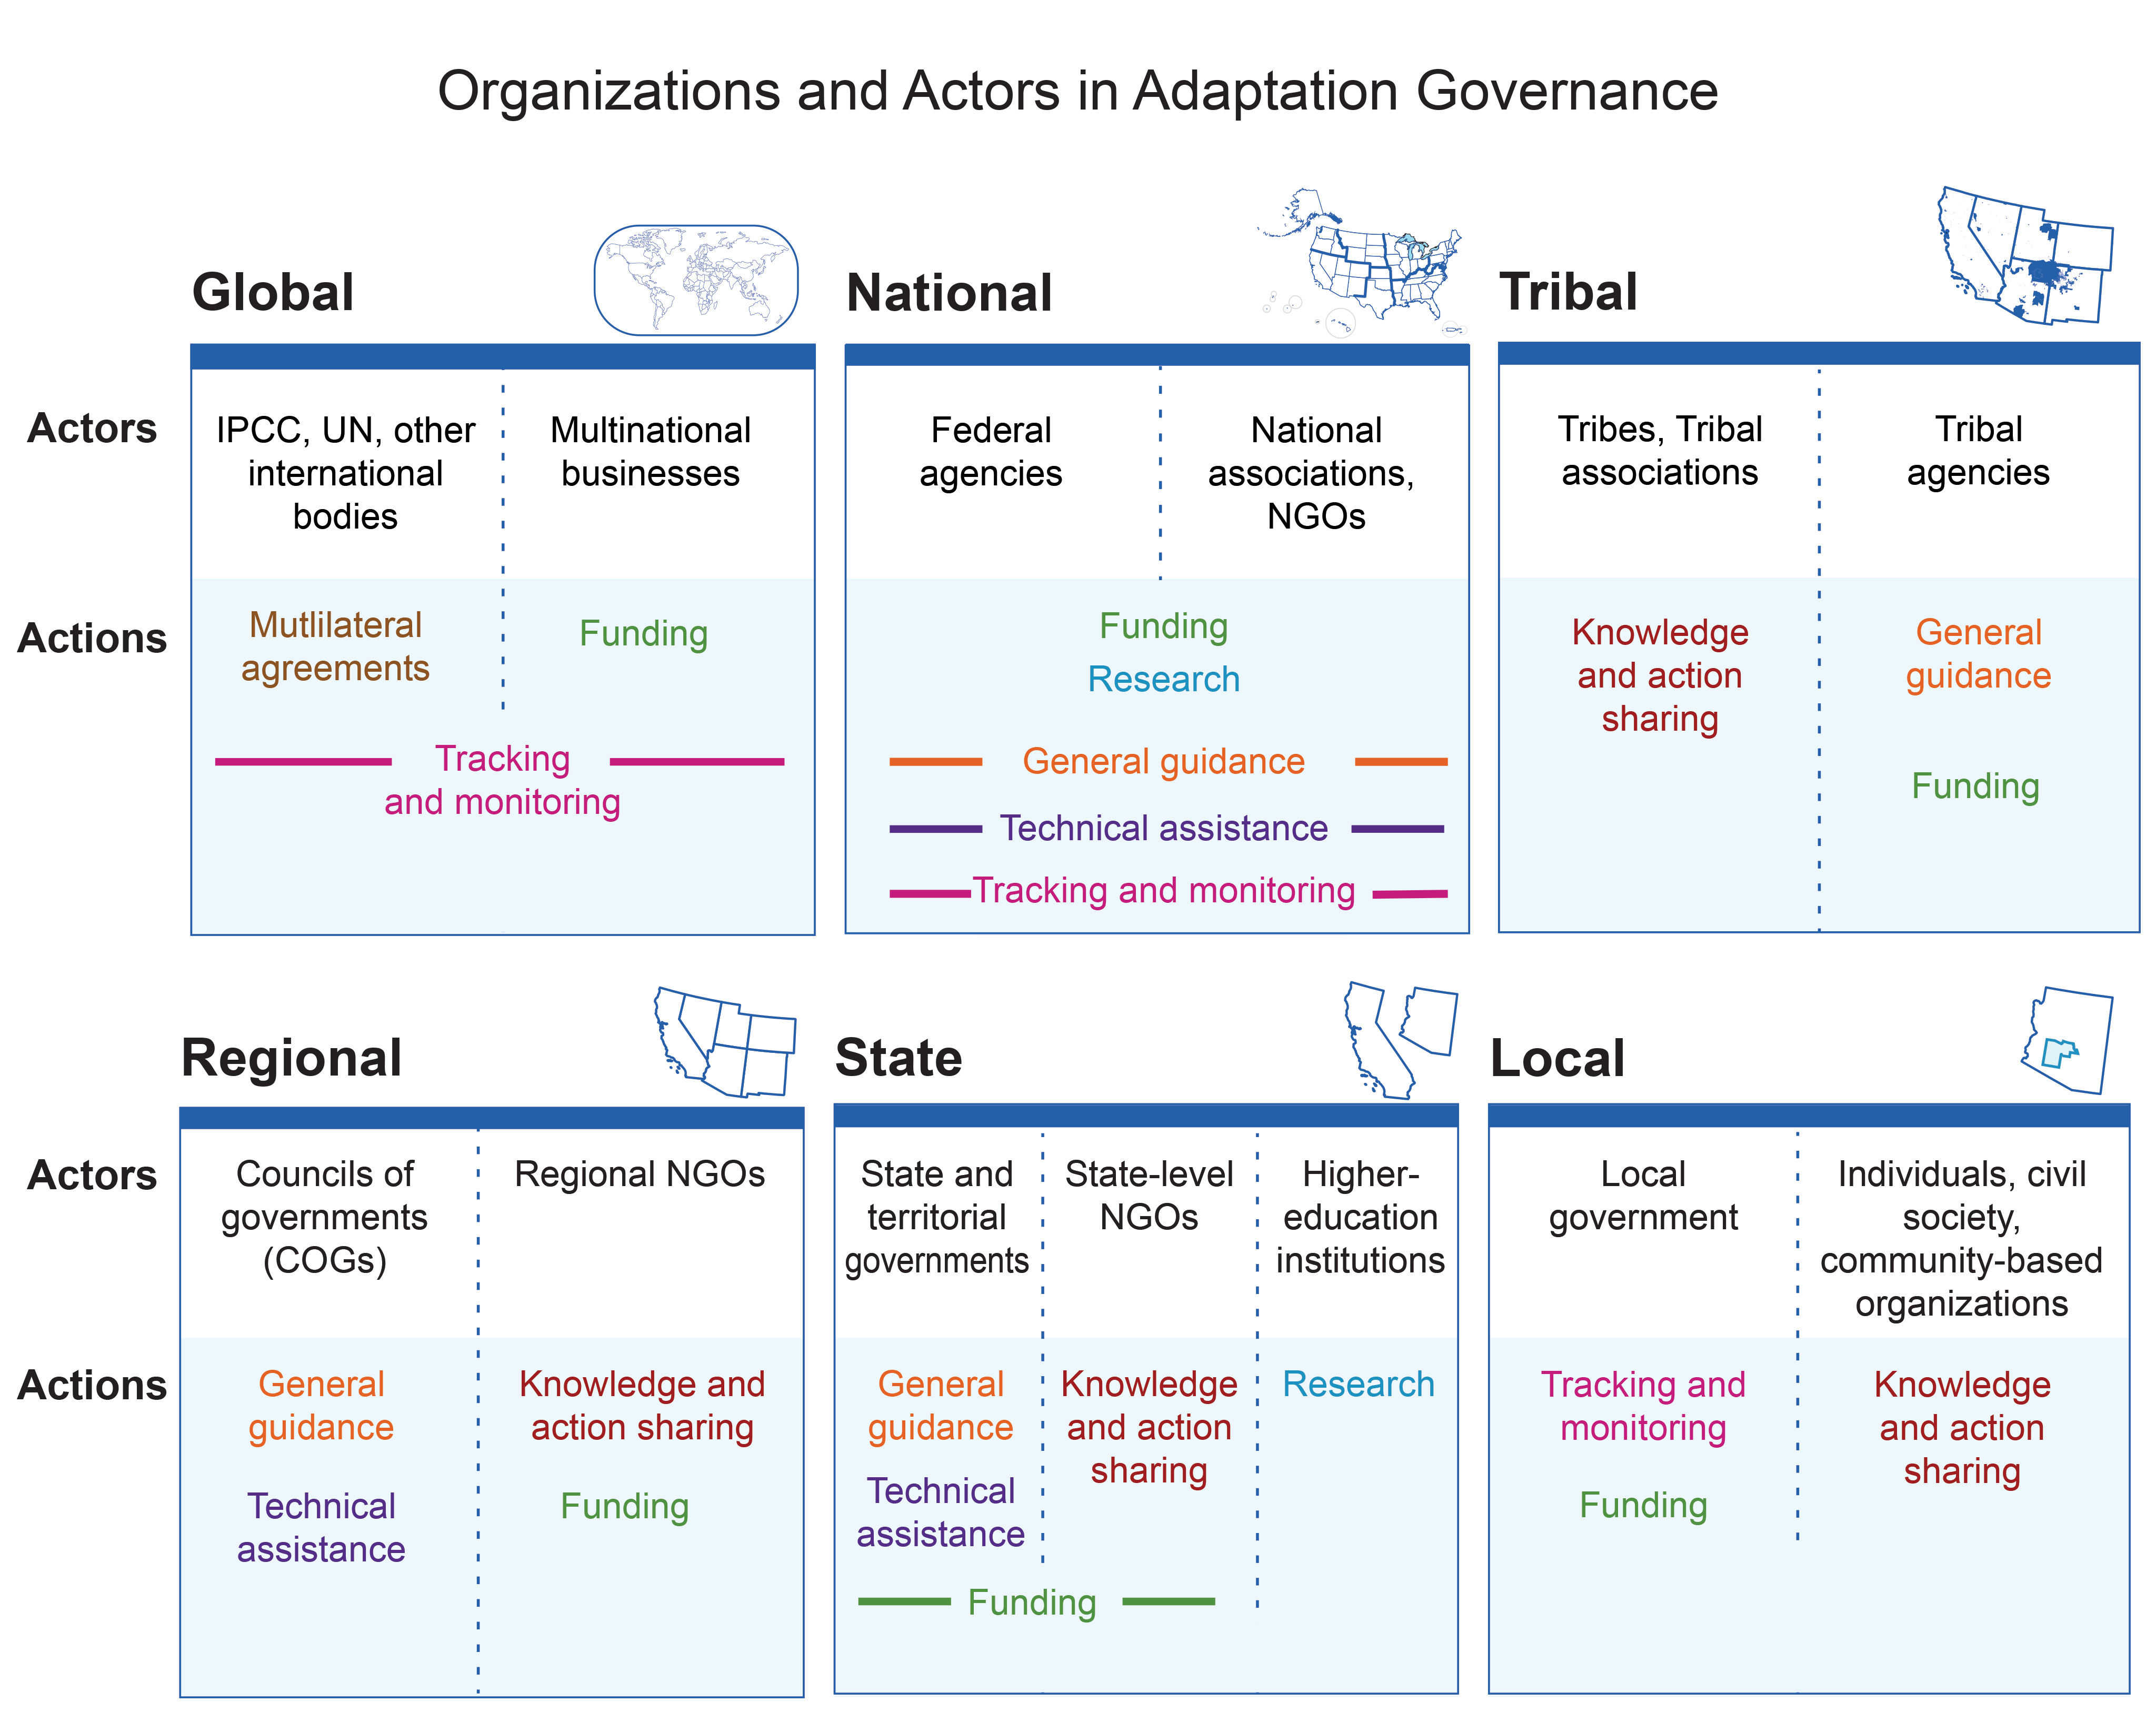 Organizations and Actors Involved in Adaptation Governance